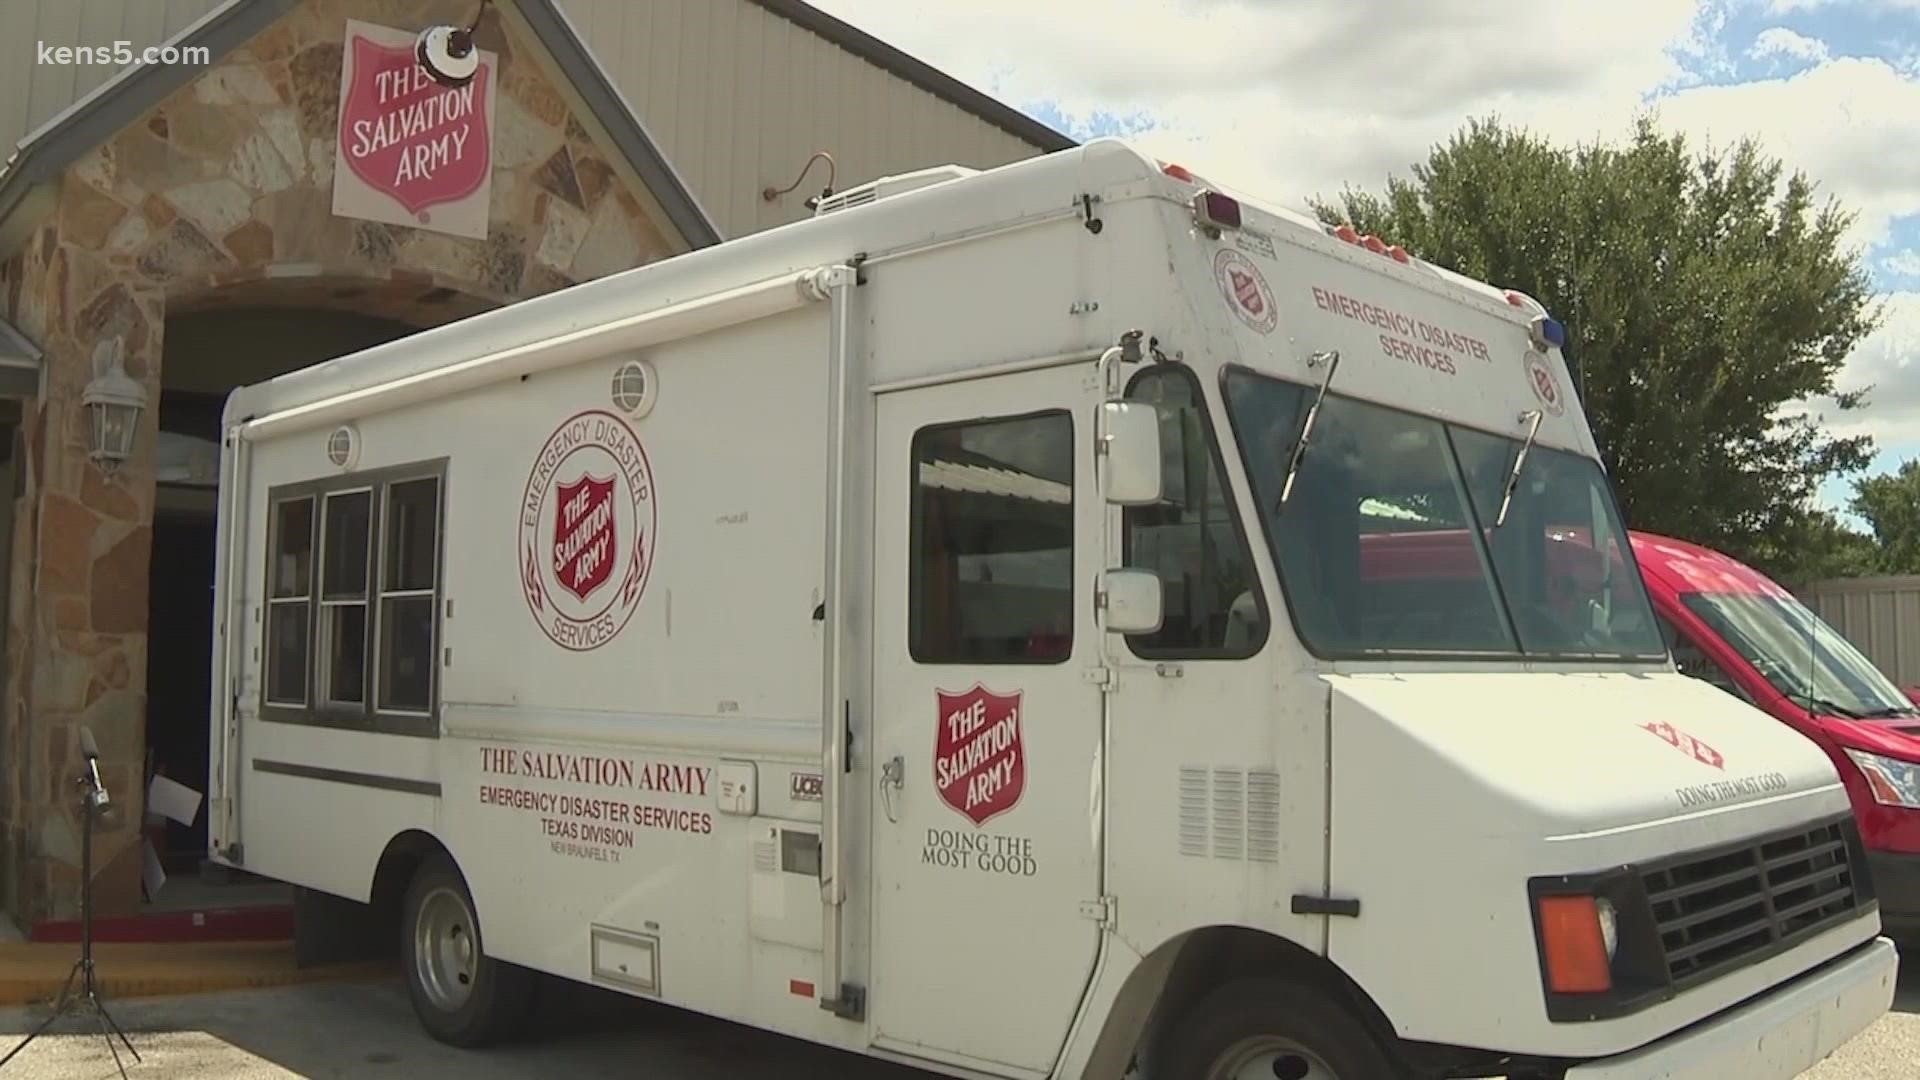 Salvation Army San Antonio and The San Antonio Food Bank said they are ready to respond to help people affected by the tropical storm.